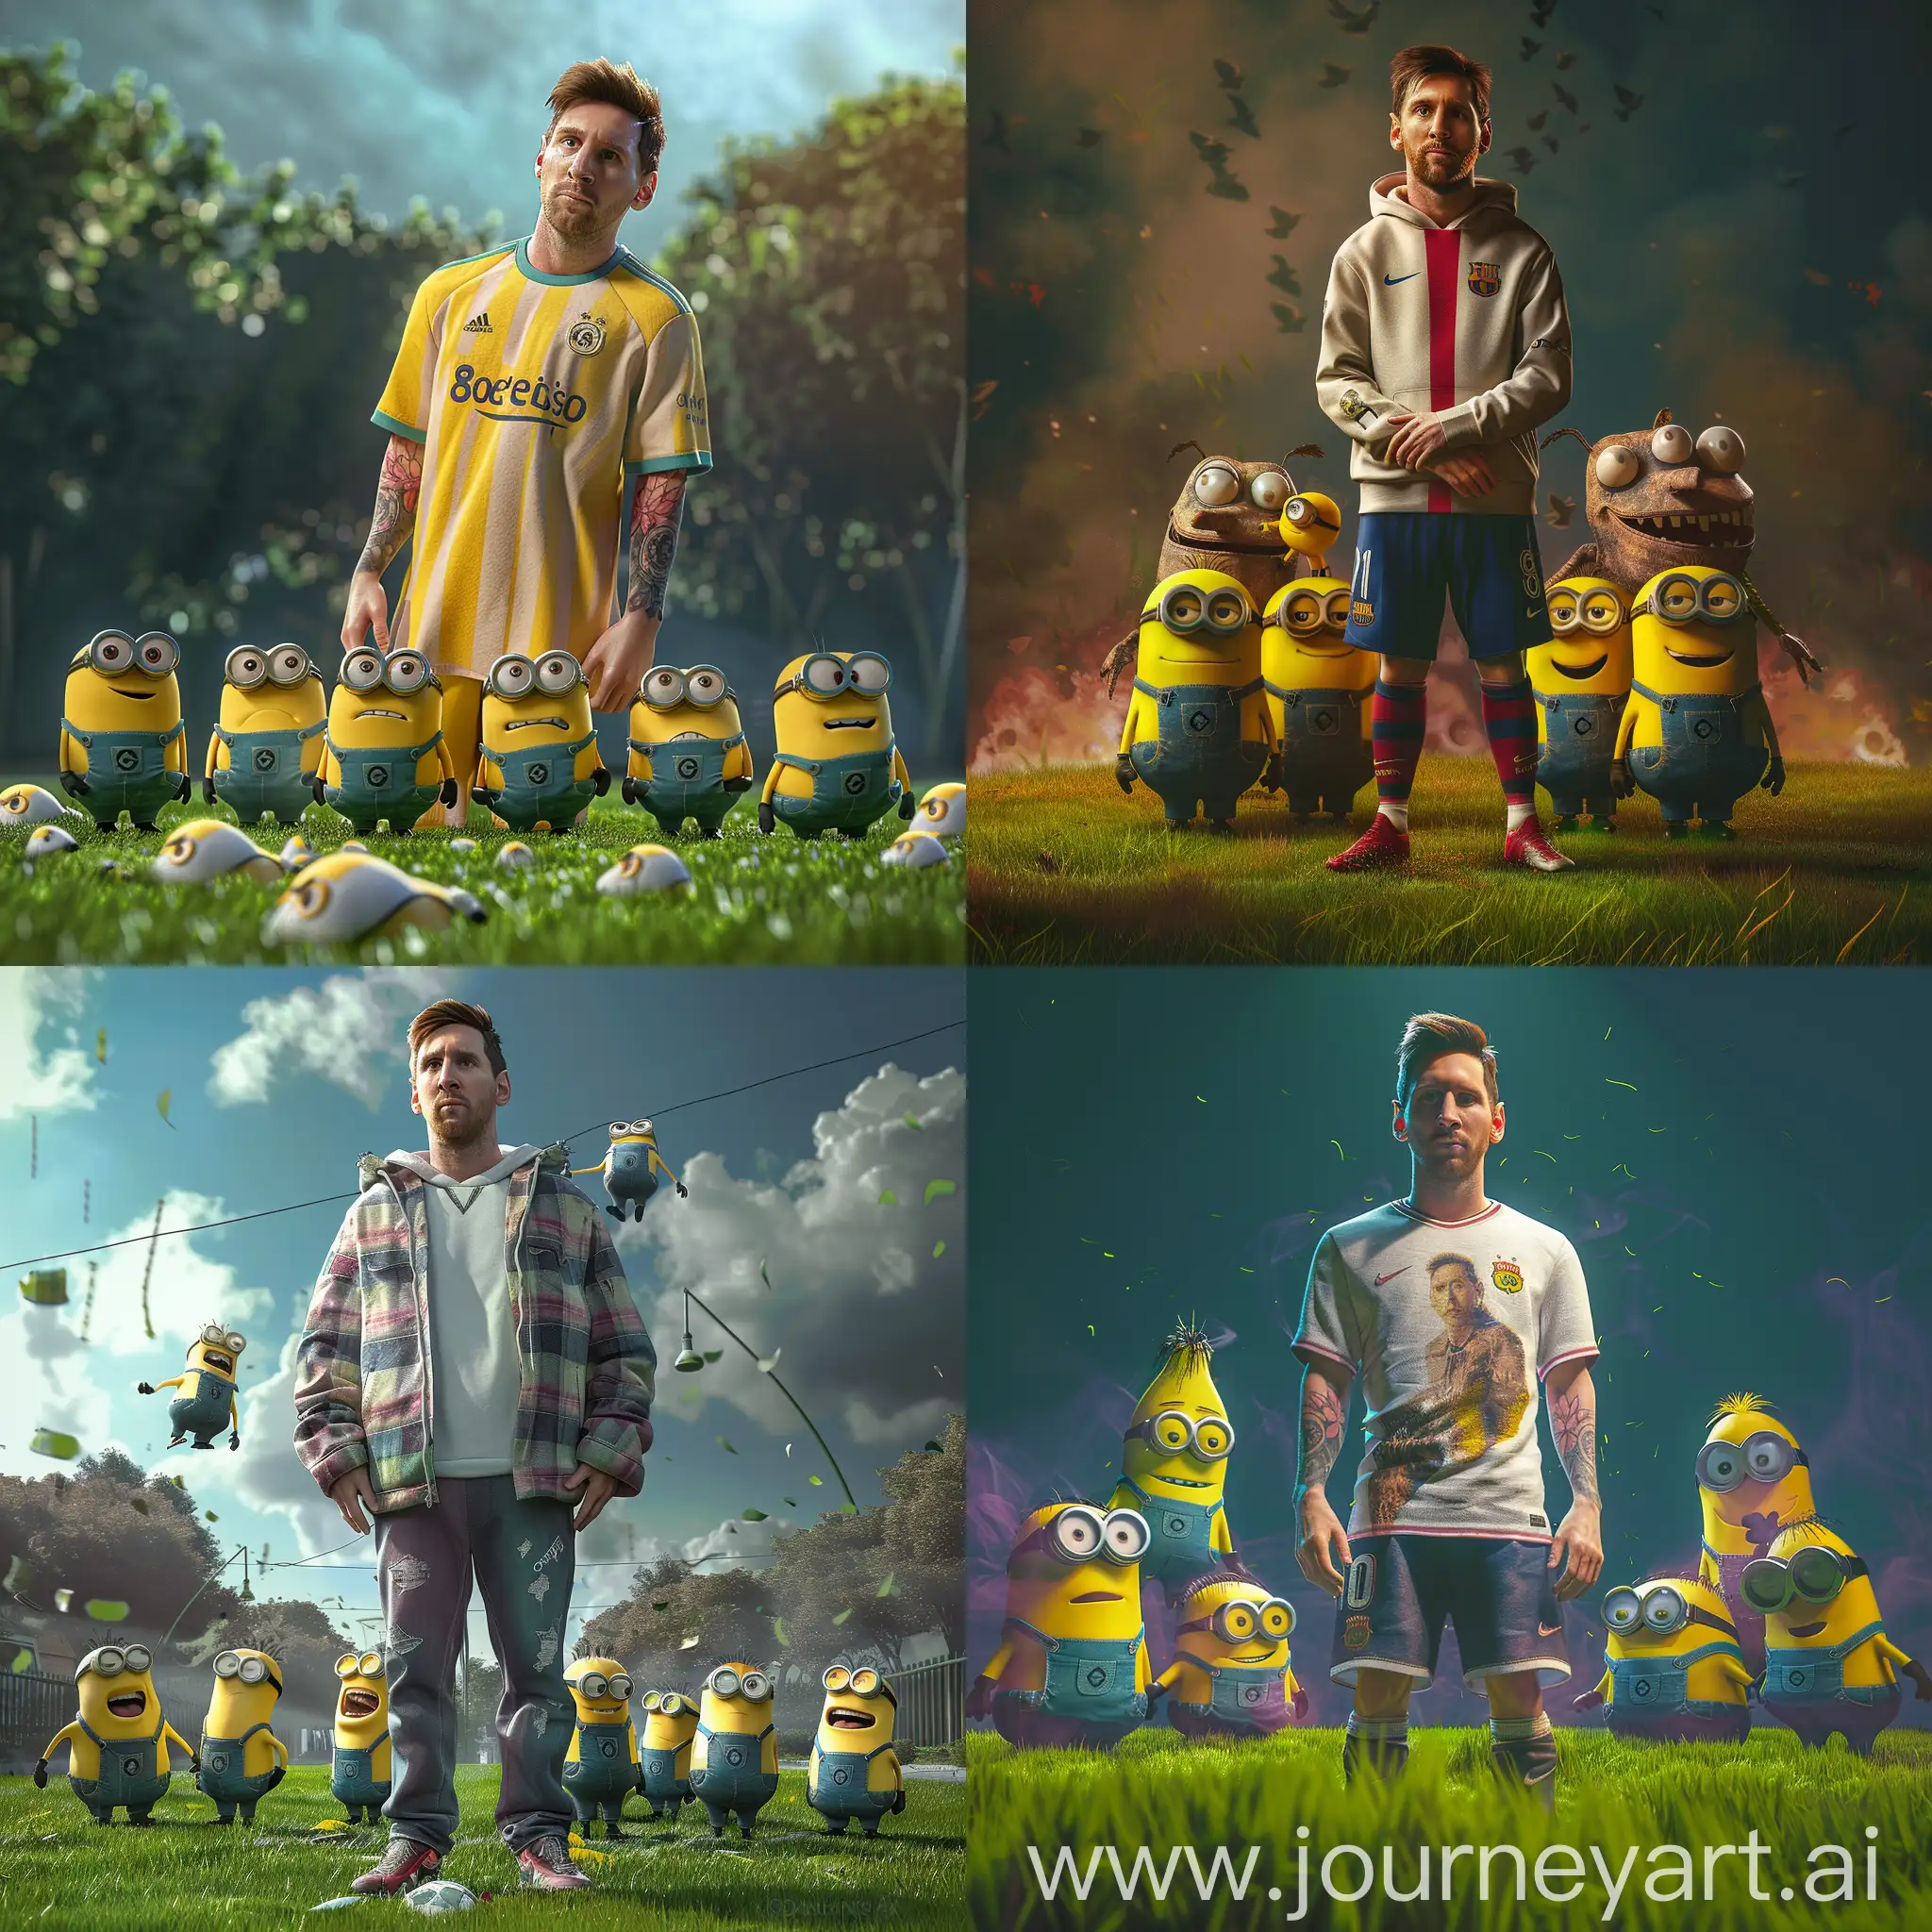 Lionel-Messi-Surrounded-by-Minions-on-Vibrant-Grass-Field